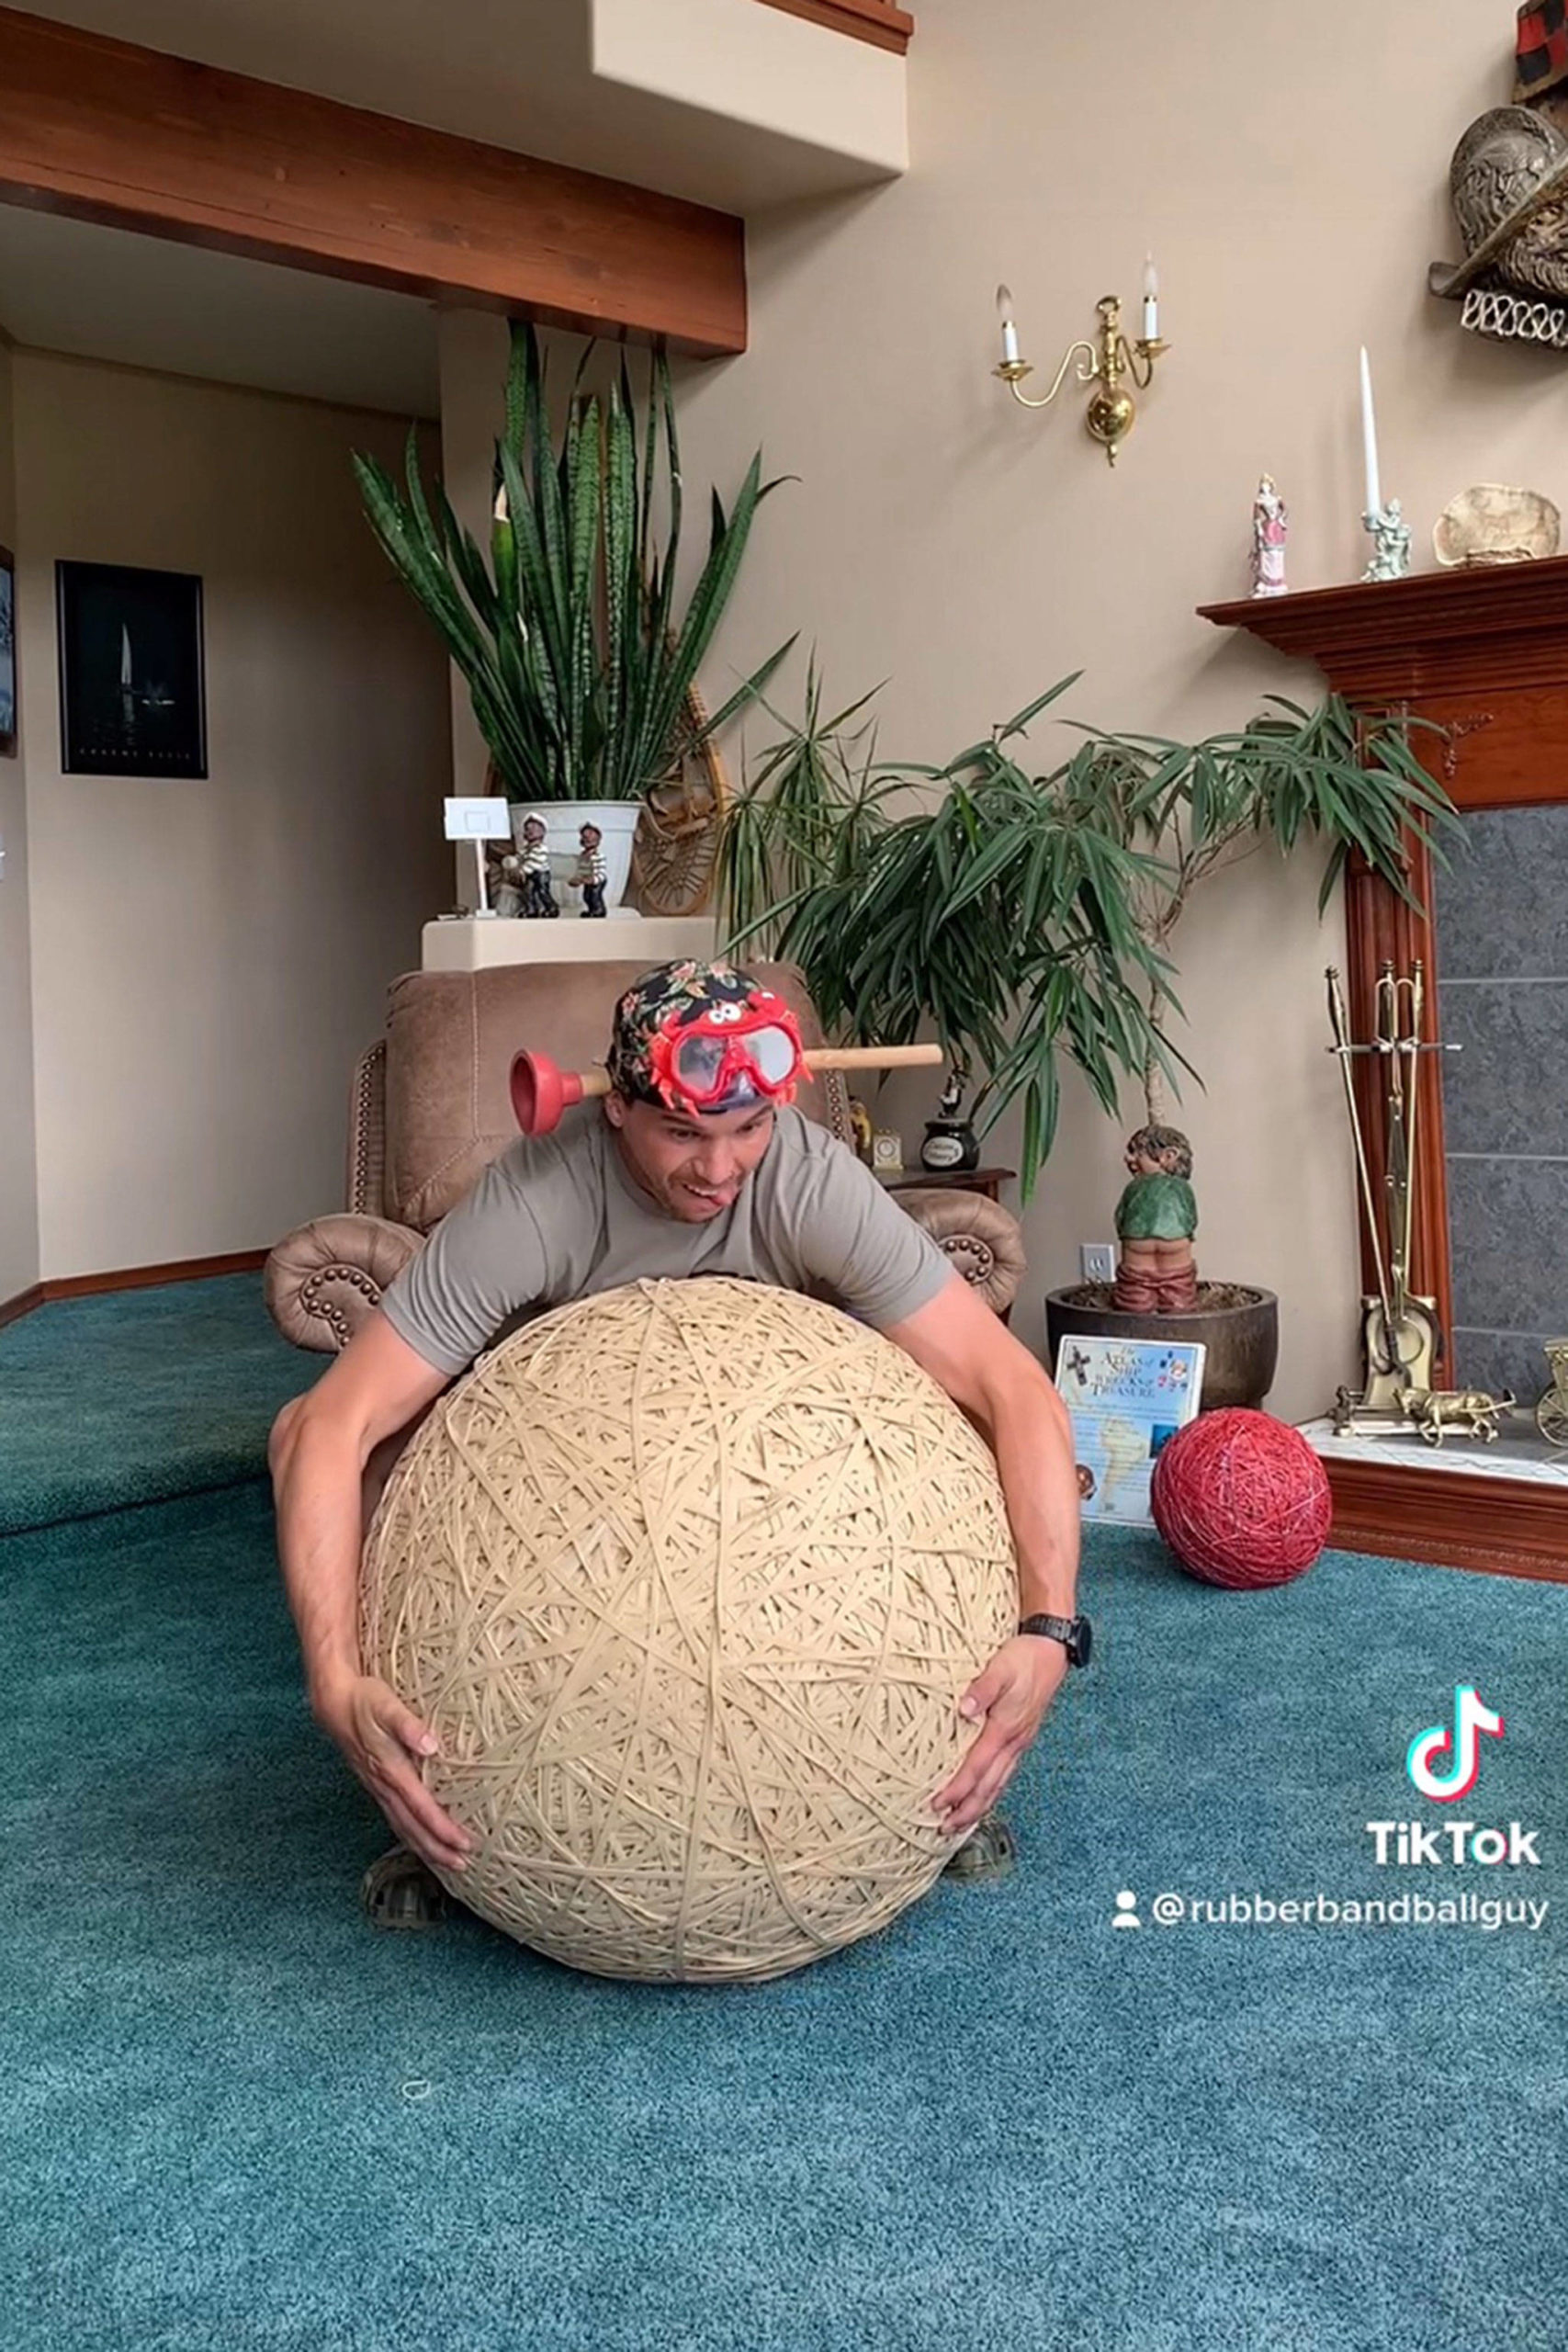 The last time Jayson Brocklesby said he was able to lift his rubber band ball was when it weighed 200 pounds. Now at 400 pounds, it’s getting harder to move, he said. Photo courtesy of Jayson Brocklesby